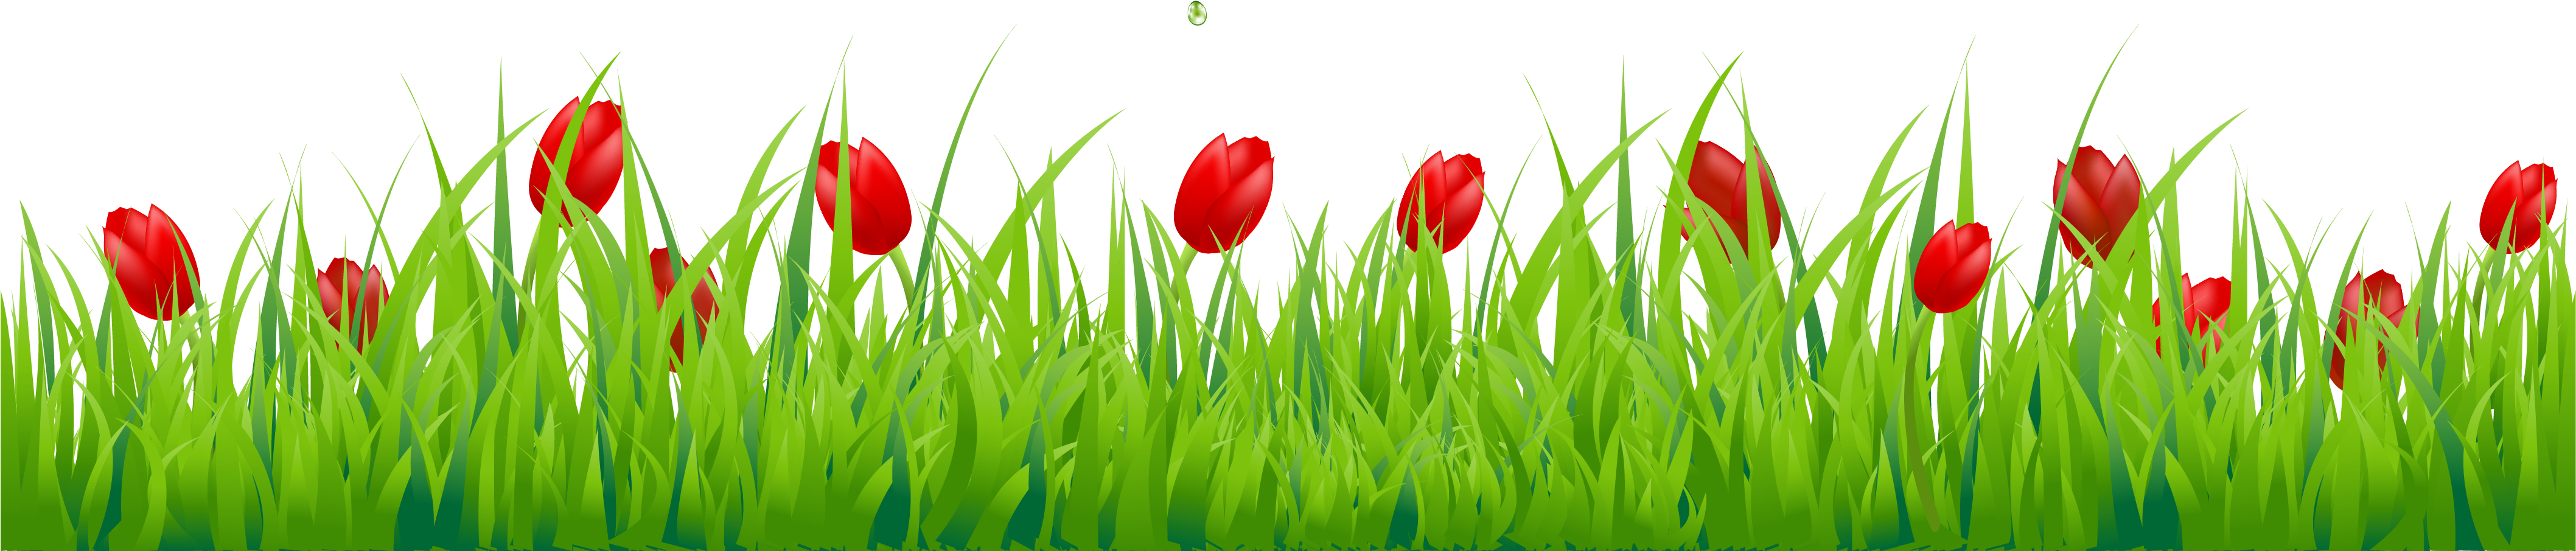 Free Clip Art Grass Clipart Image - Grass And Flowers Clipart (4268x919)